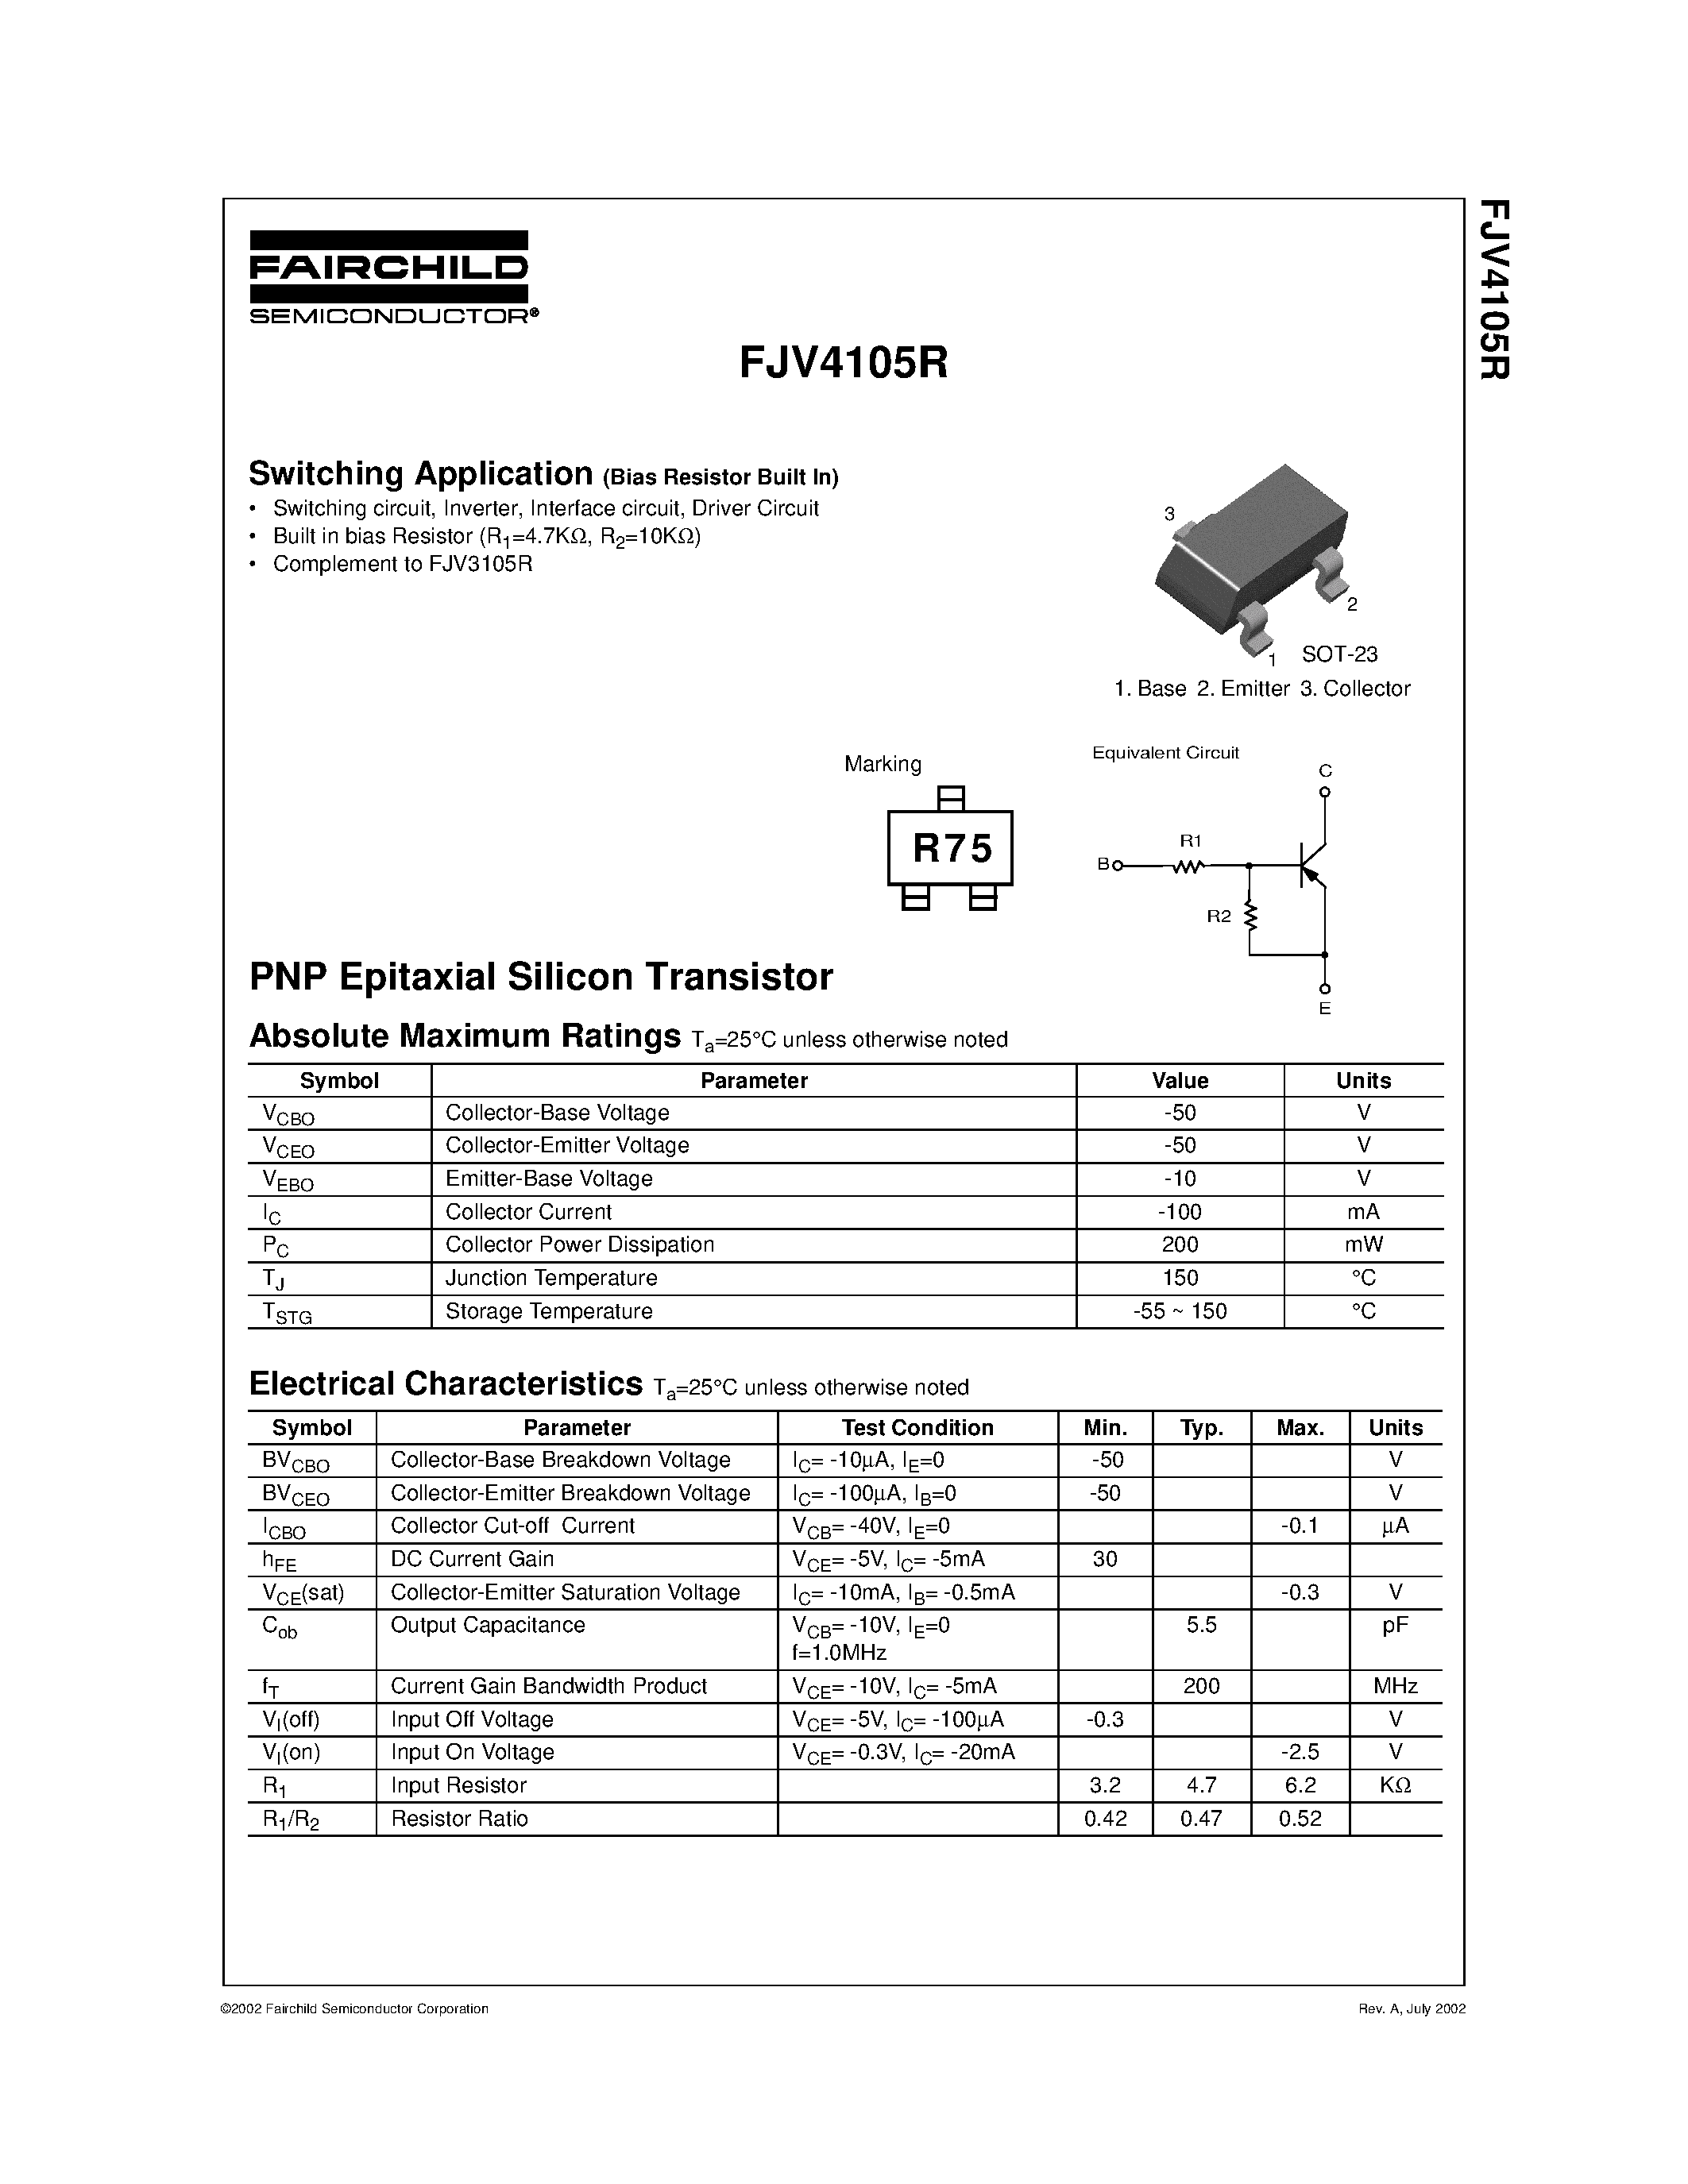 Даташит FJV4105R - PNP Epitaxial Silicon Transistor страница 1